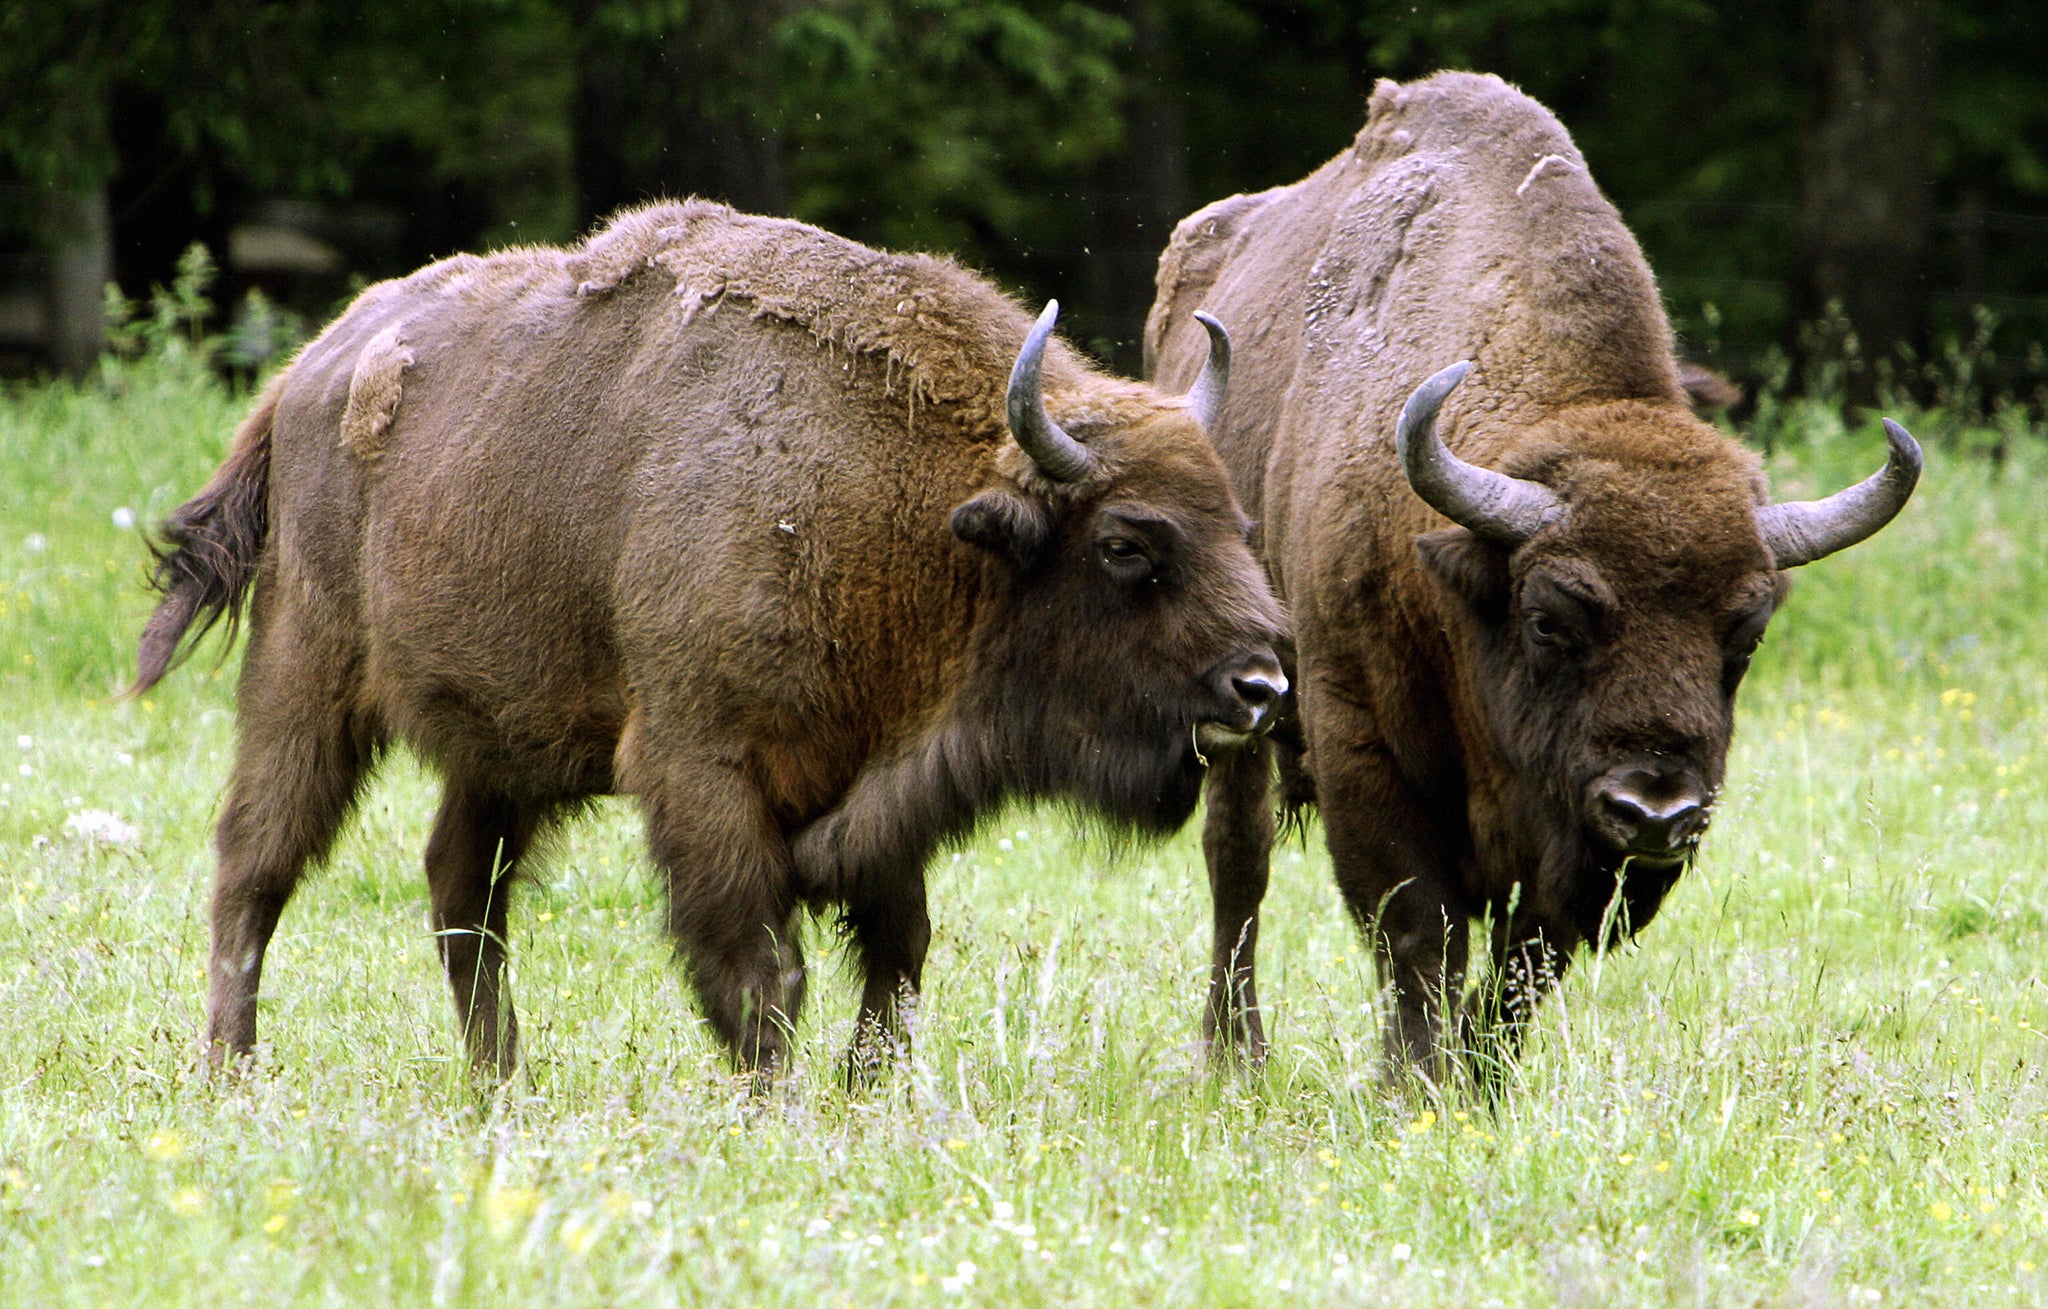 The area is home to Europe’s largest herd of bison